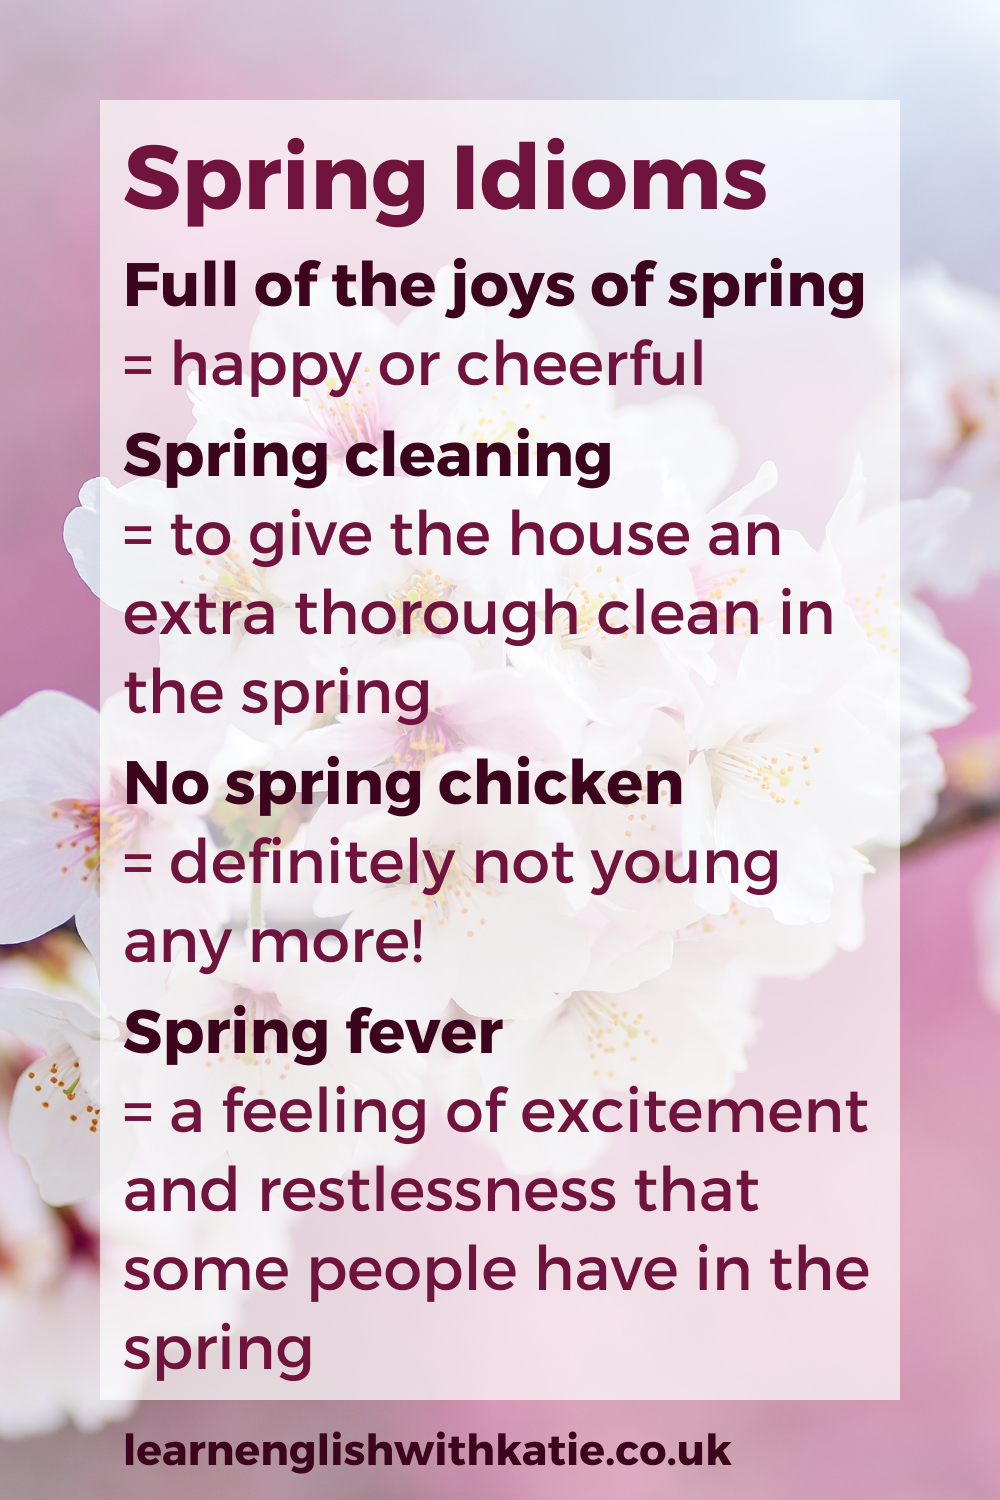 Pinterest pin for spring idioms